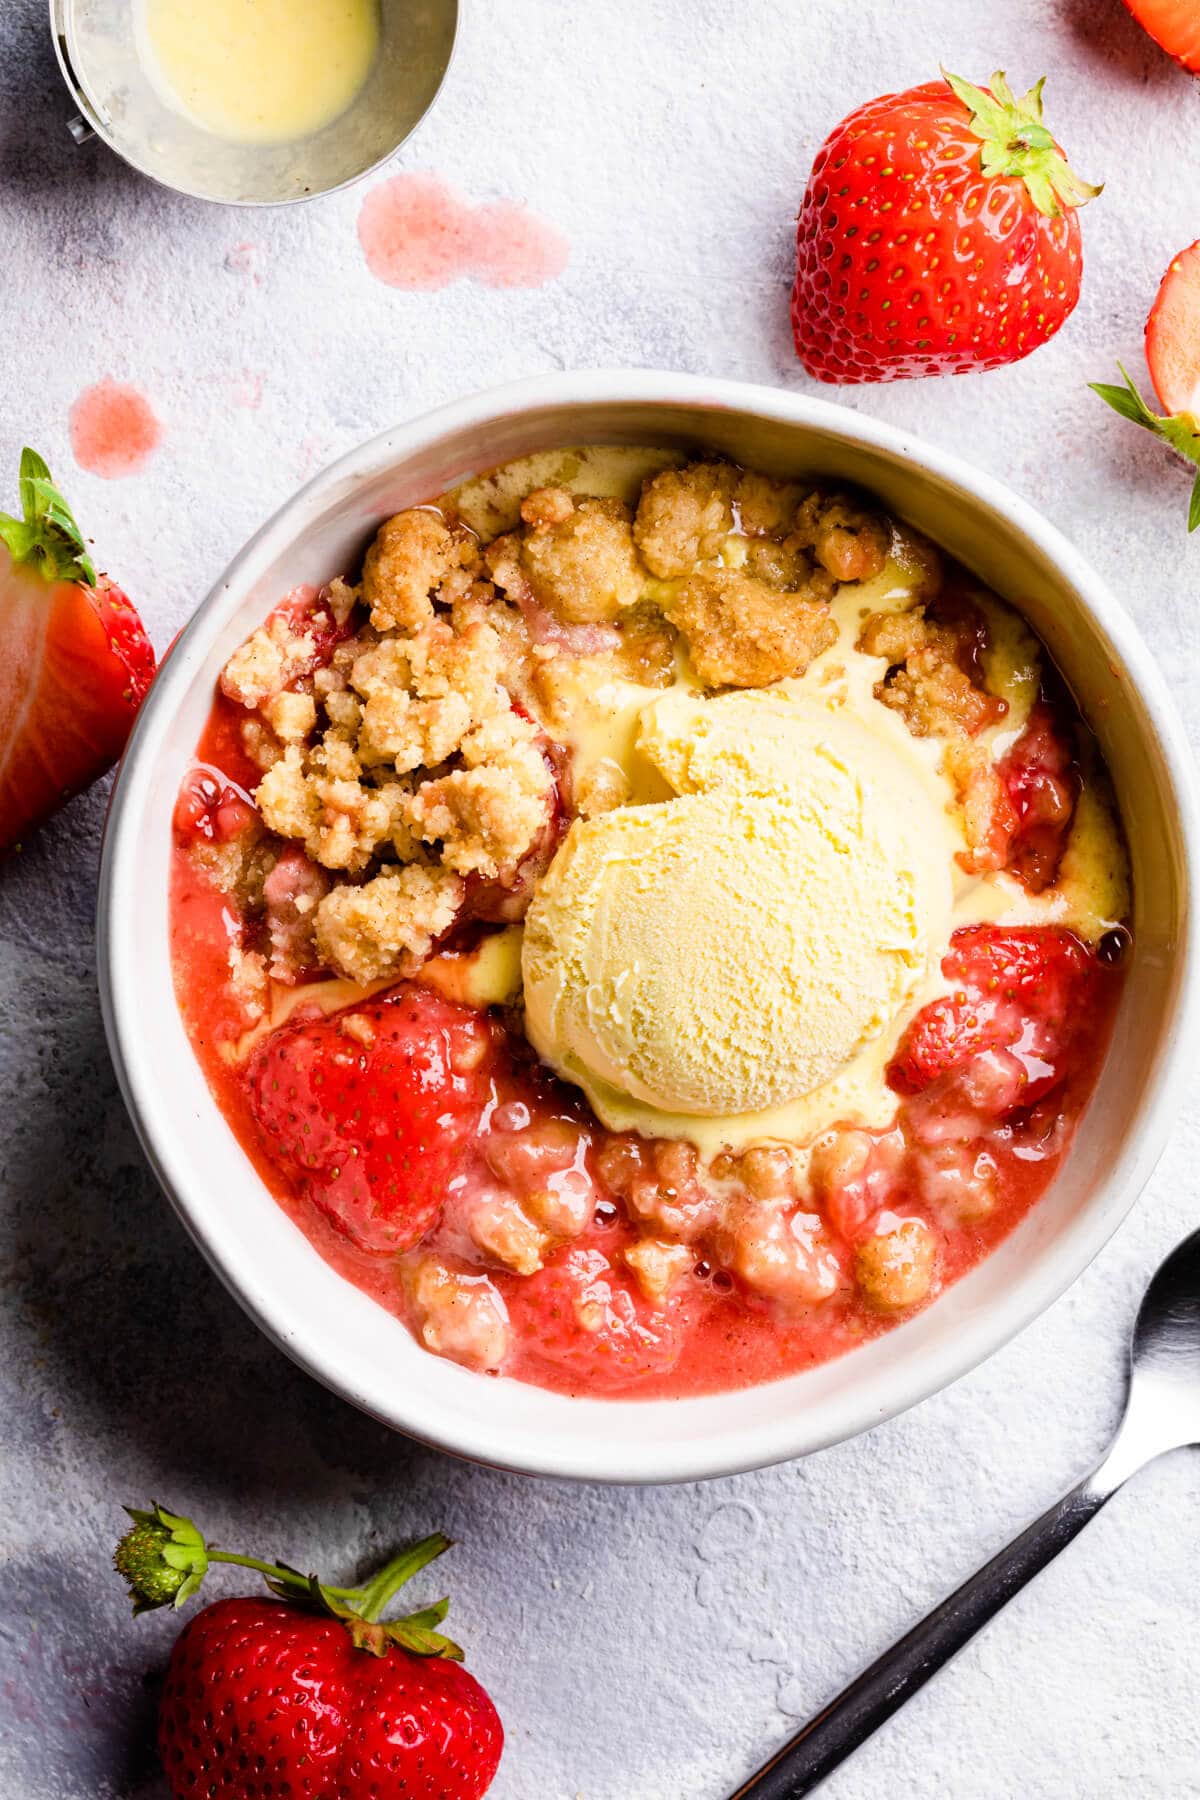 top down view of a bowl with strawberry crumble and a scoop of ice cream